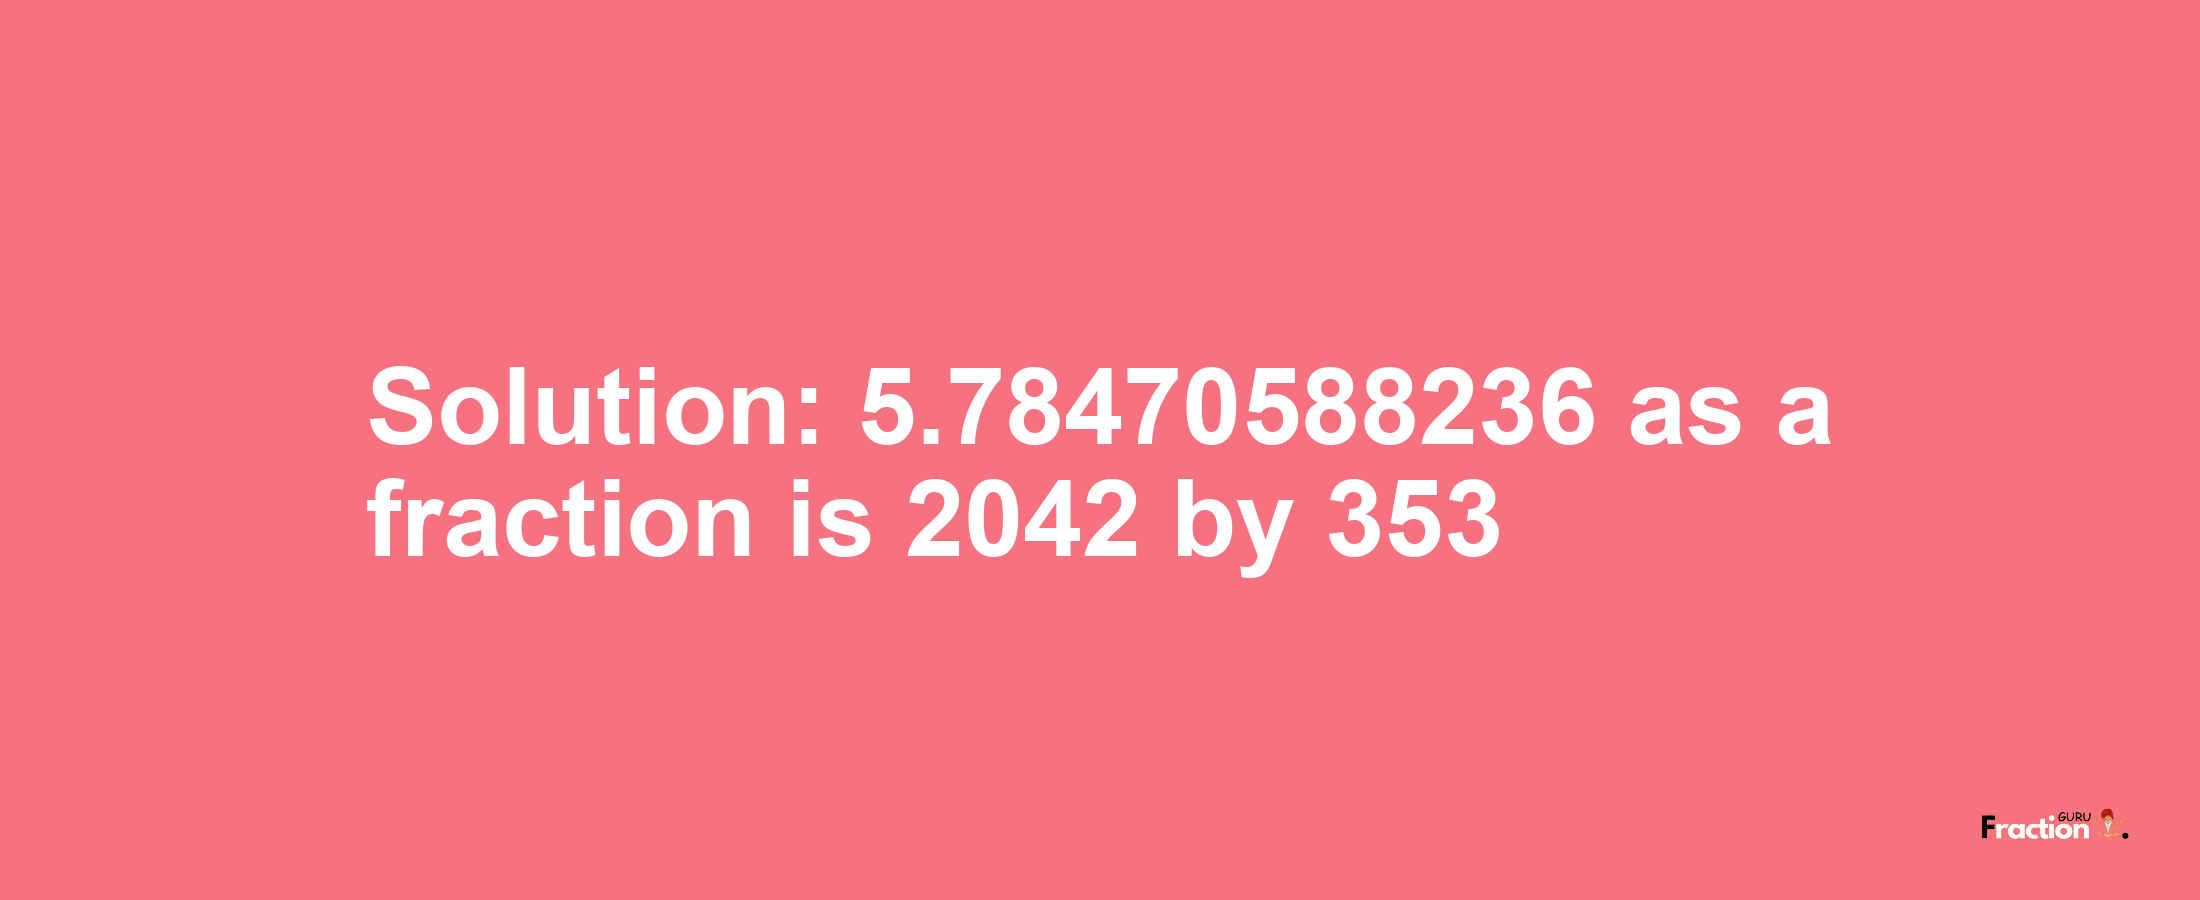 Solution:5.78470588236 as a fraction is 2042/353